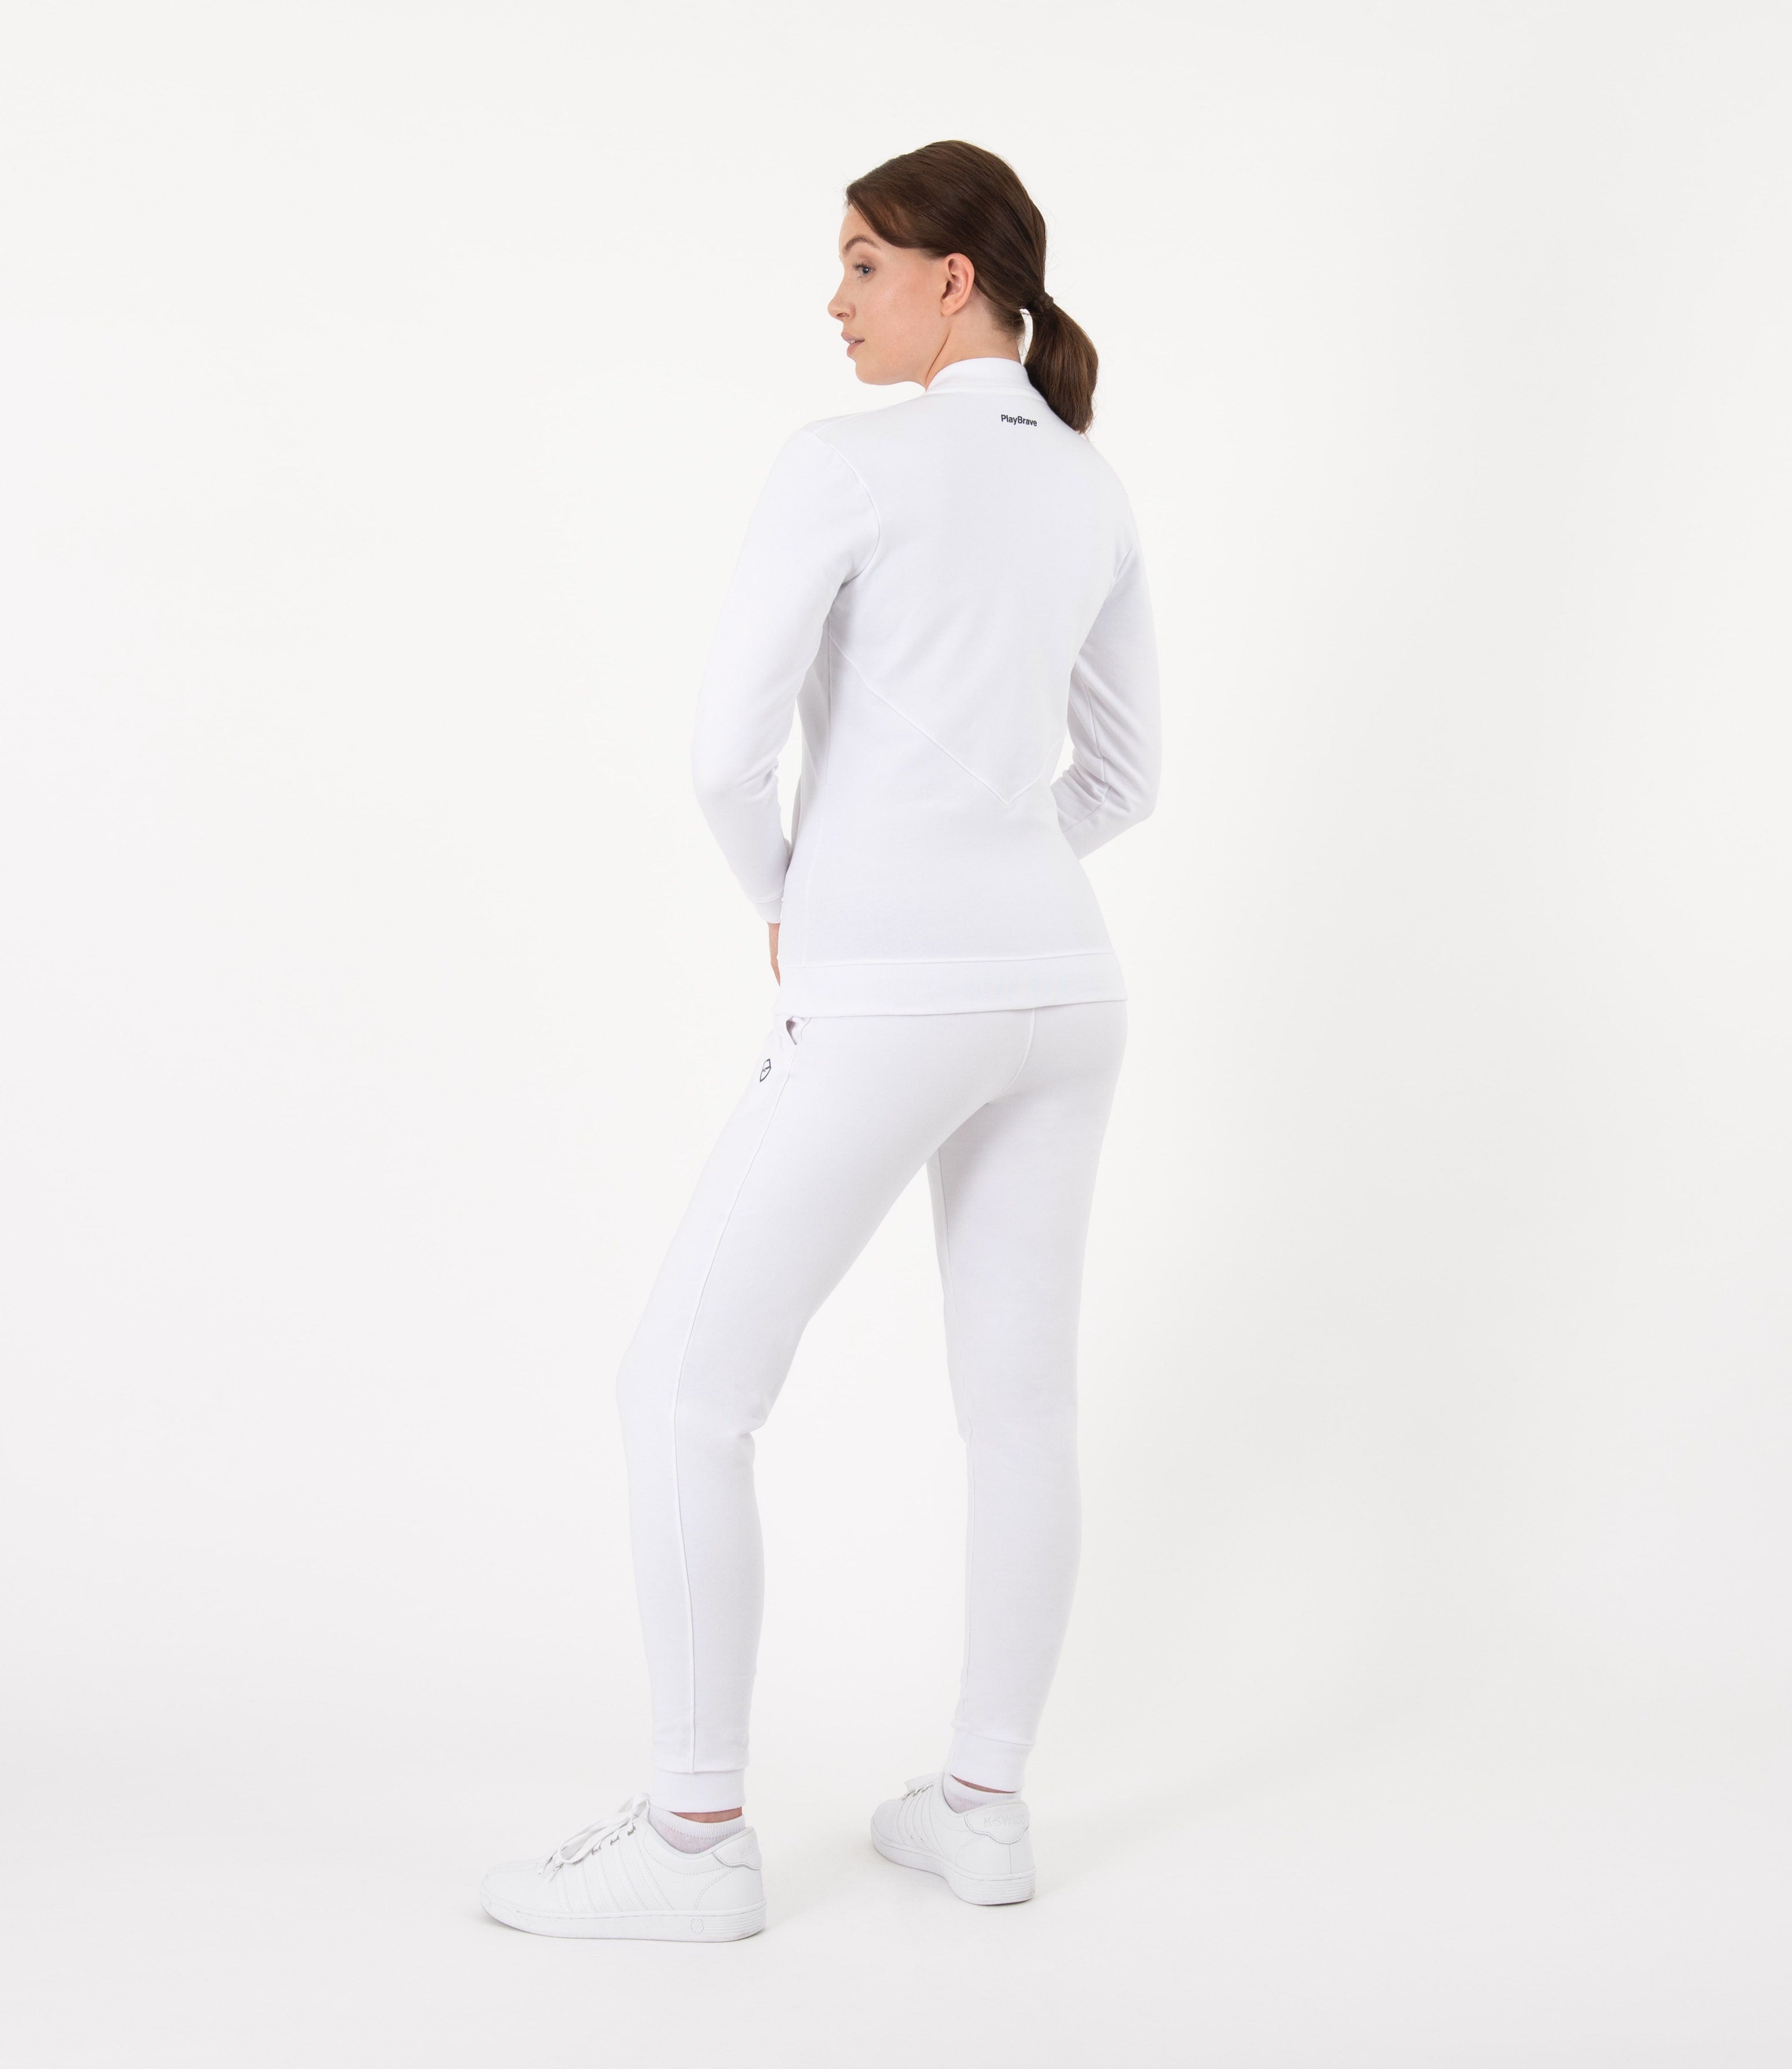 Beatrice Cotton Fitted Jacket - White | PlayBrave Sportswear